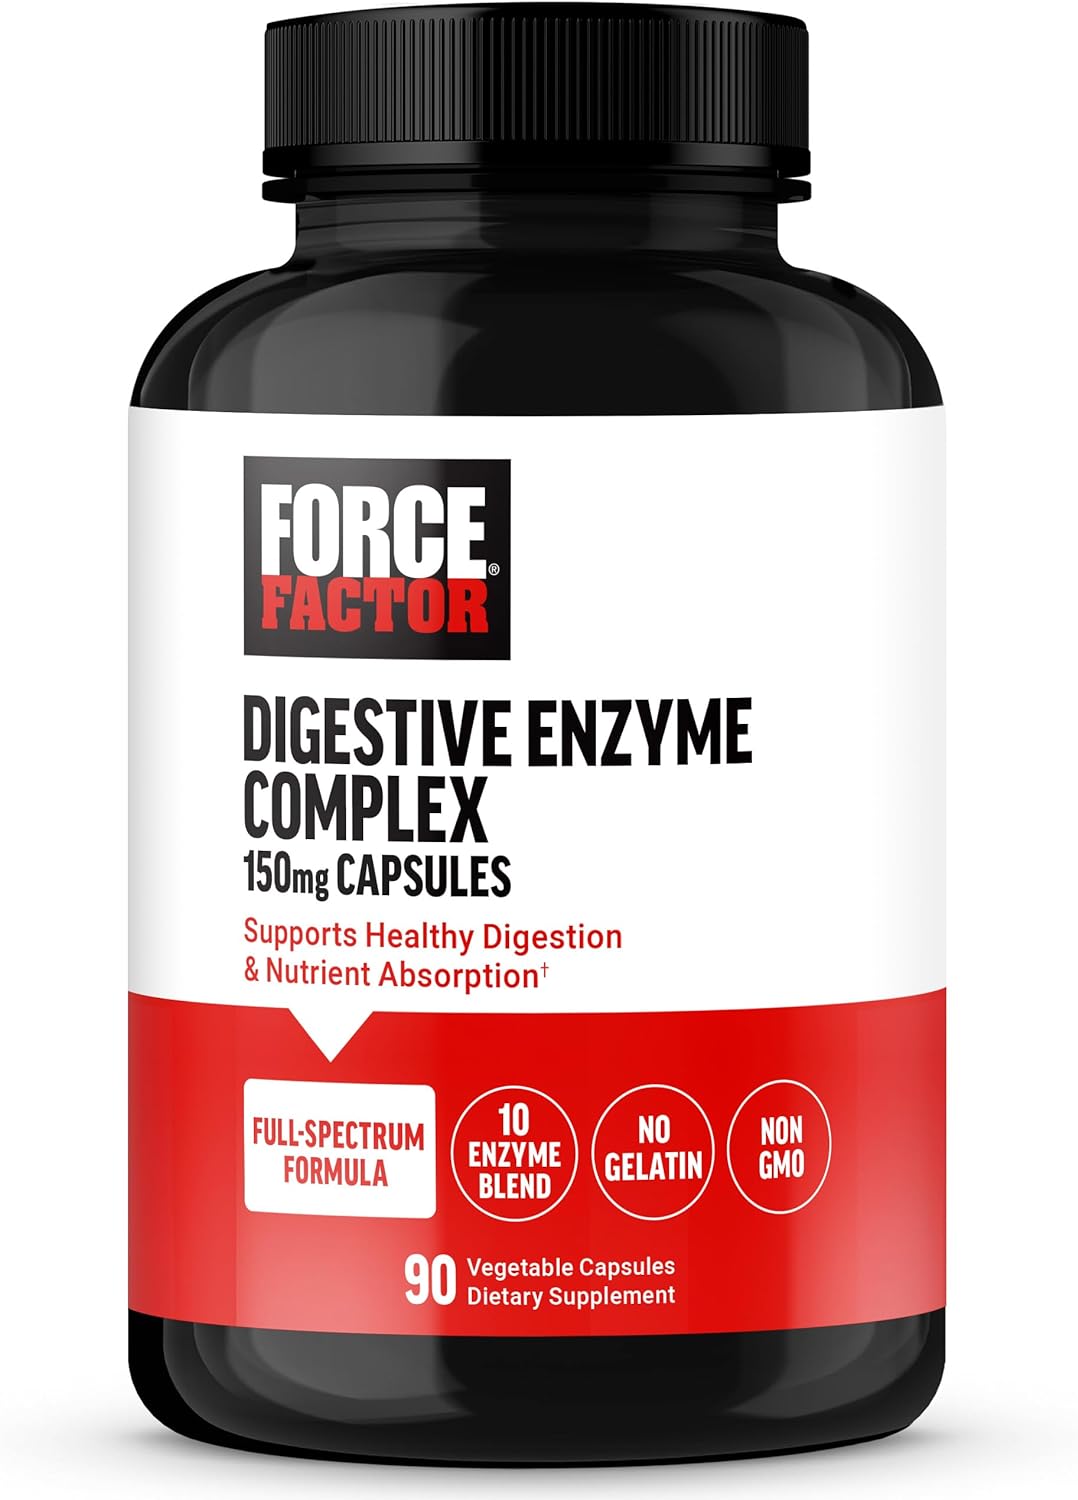 FORCE FACTOR Digestive Enzymes Complex to Support Digestive Health, Gut Health, and Provide Bloating Relief for Women and Men, Full-Spectrum 10 Digestive Enzymes, Non-GMO, 90 Capsules